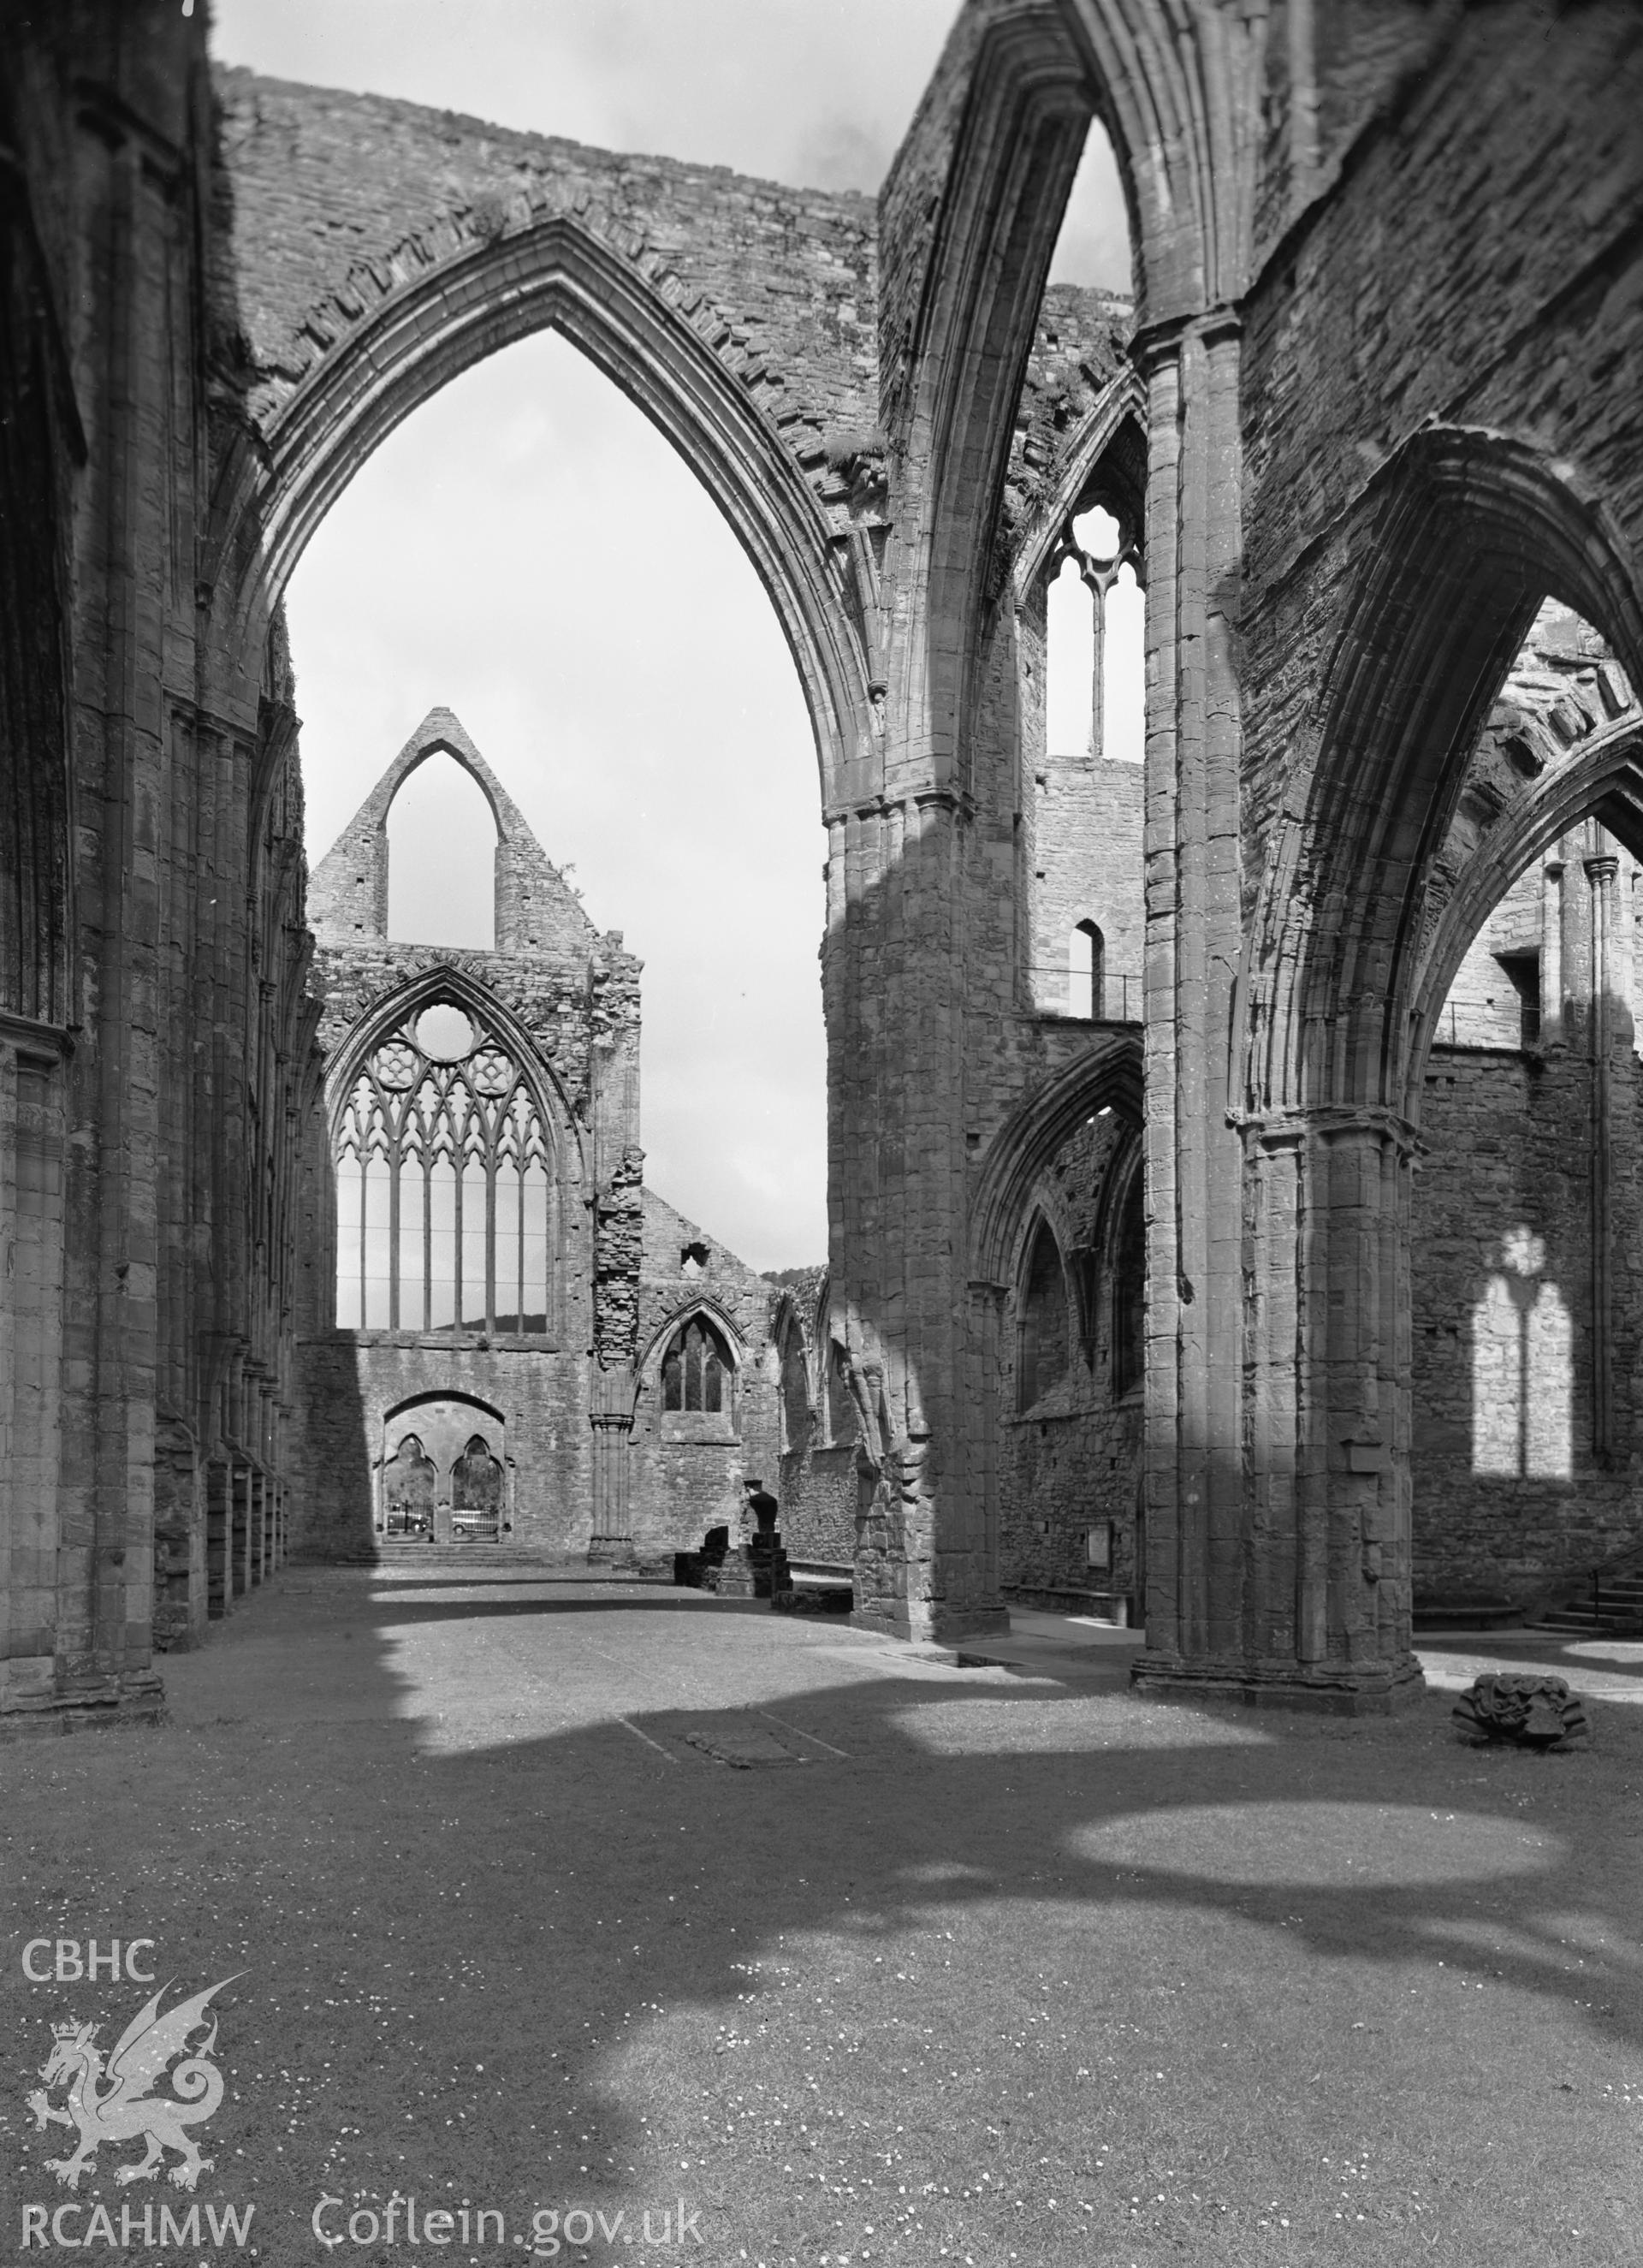 D.O.E. black and white negative of Tintern Abbey: interior view, showing the Nave.